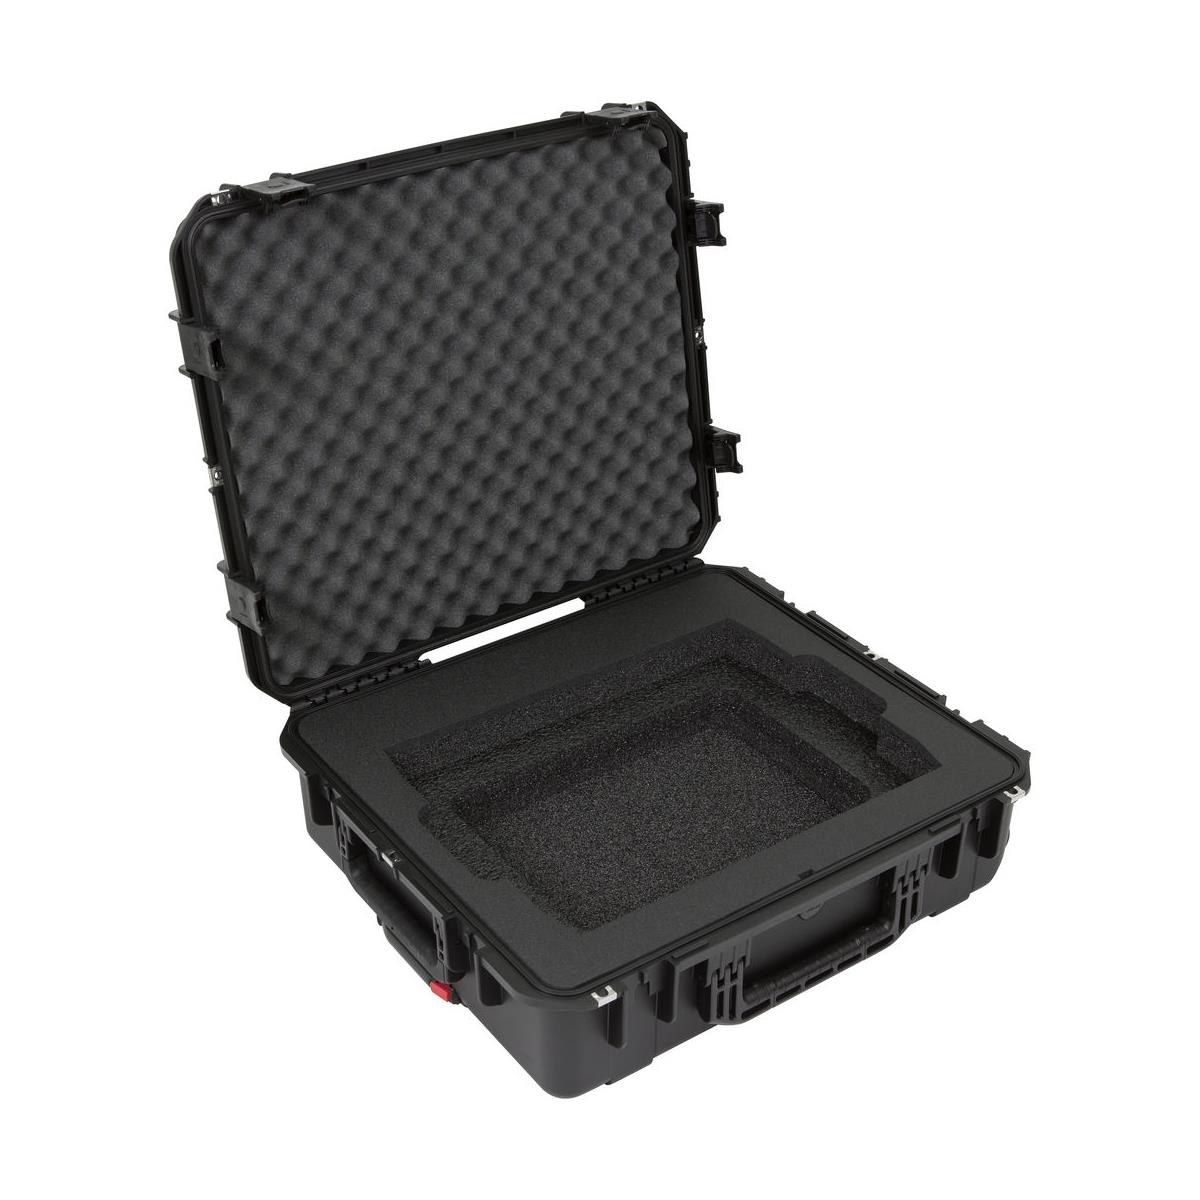 Image of SKB iSeries Injection Molded Case for Akai MPC X Sampler/Sequencer